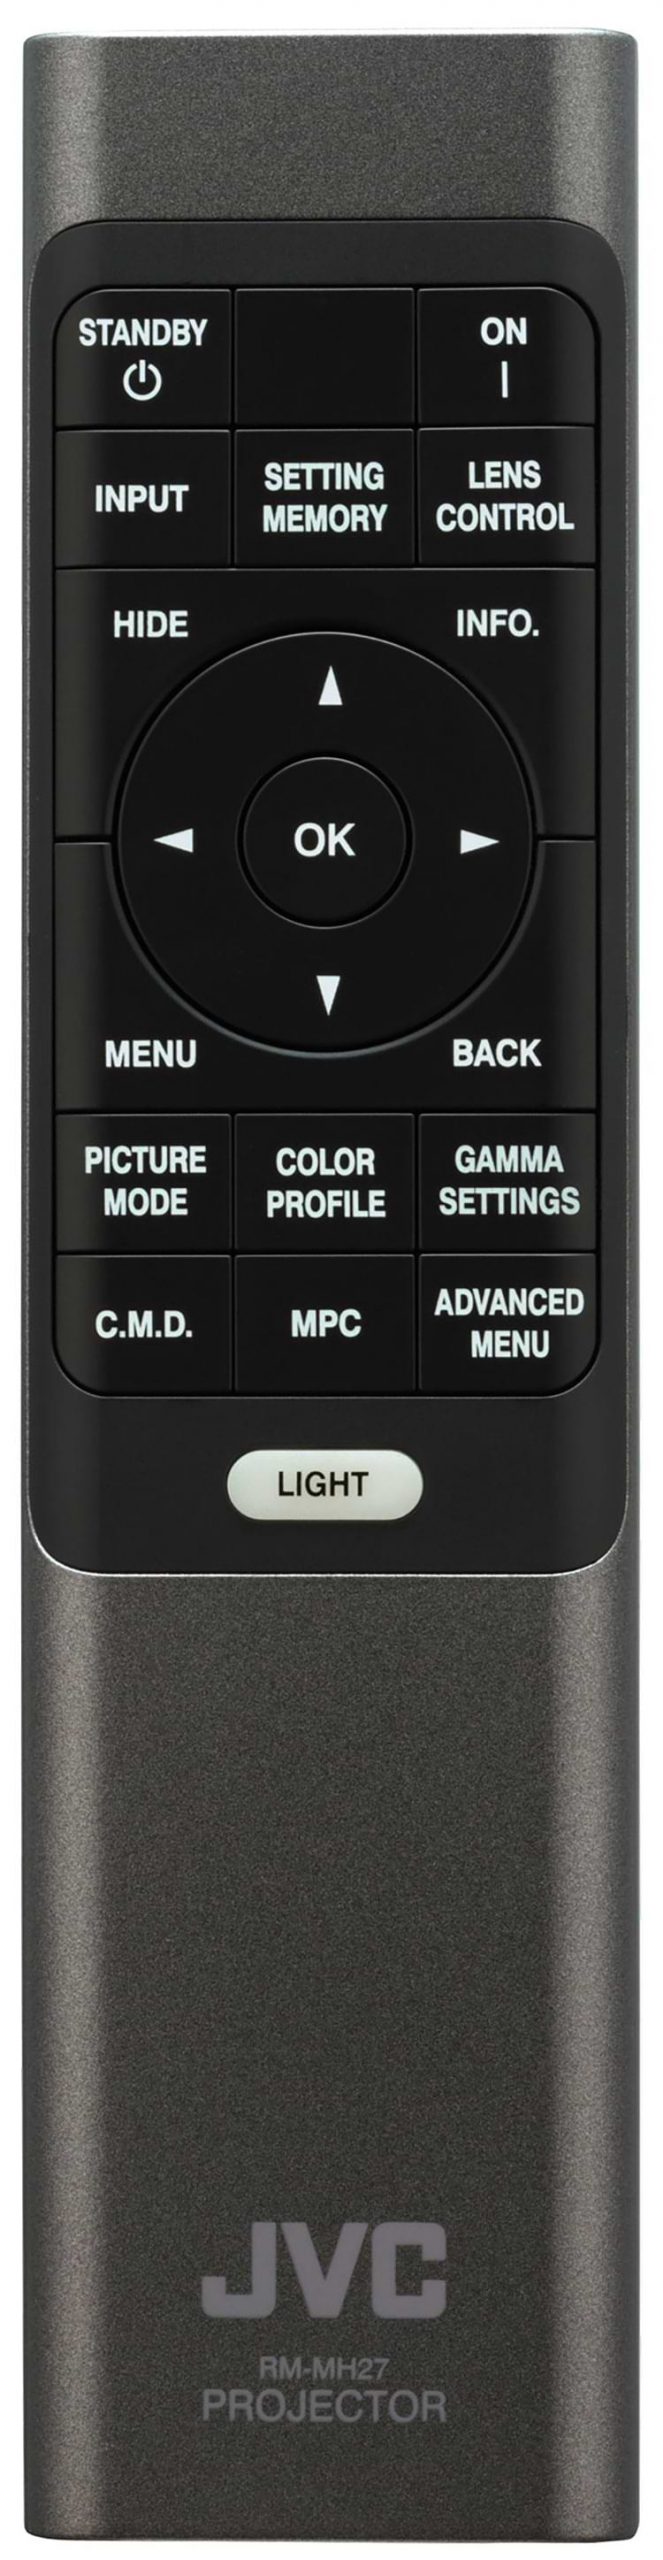 JVC's RM-MH27 Projector Model Remote Figure 5